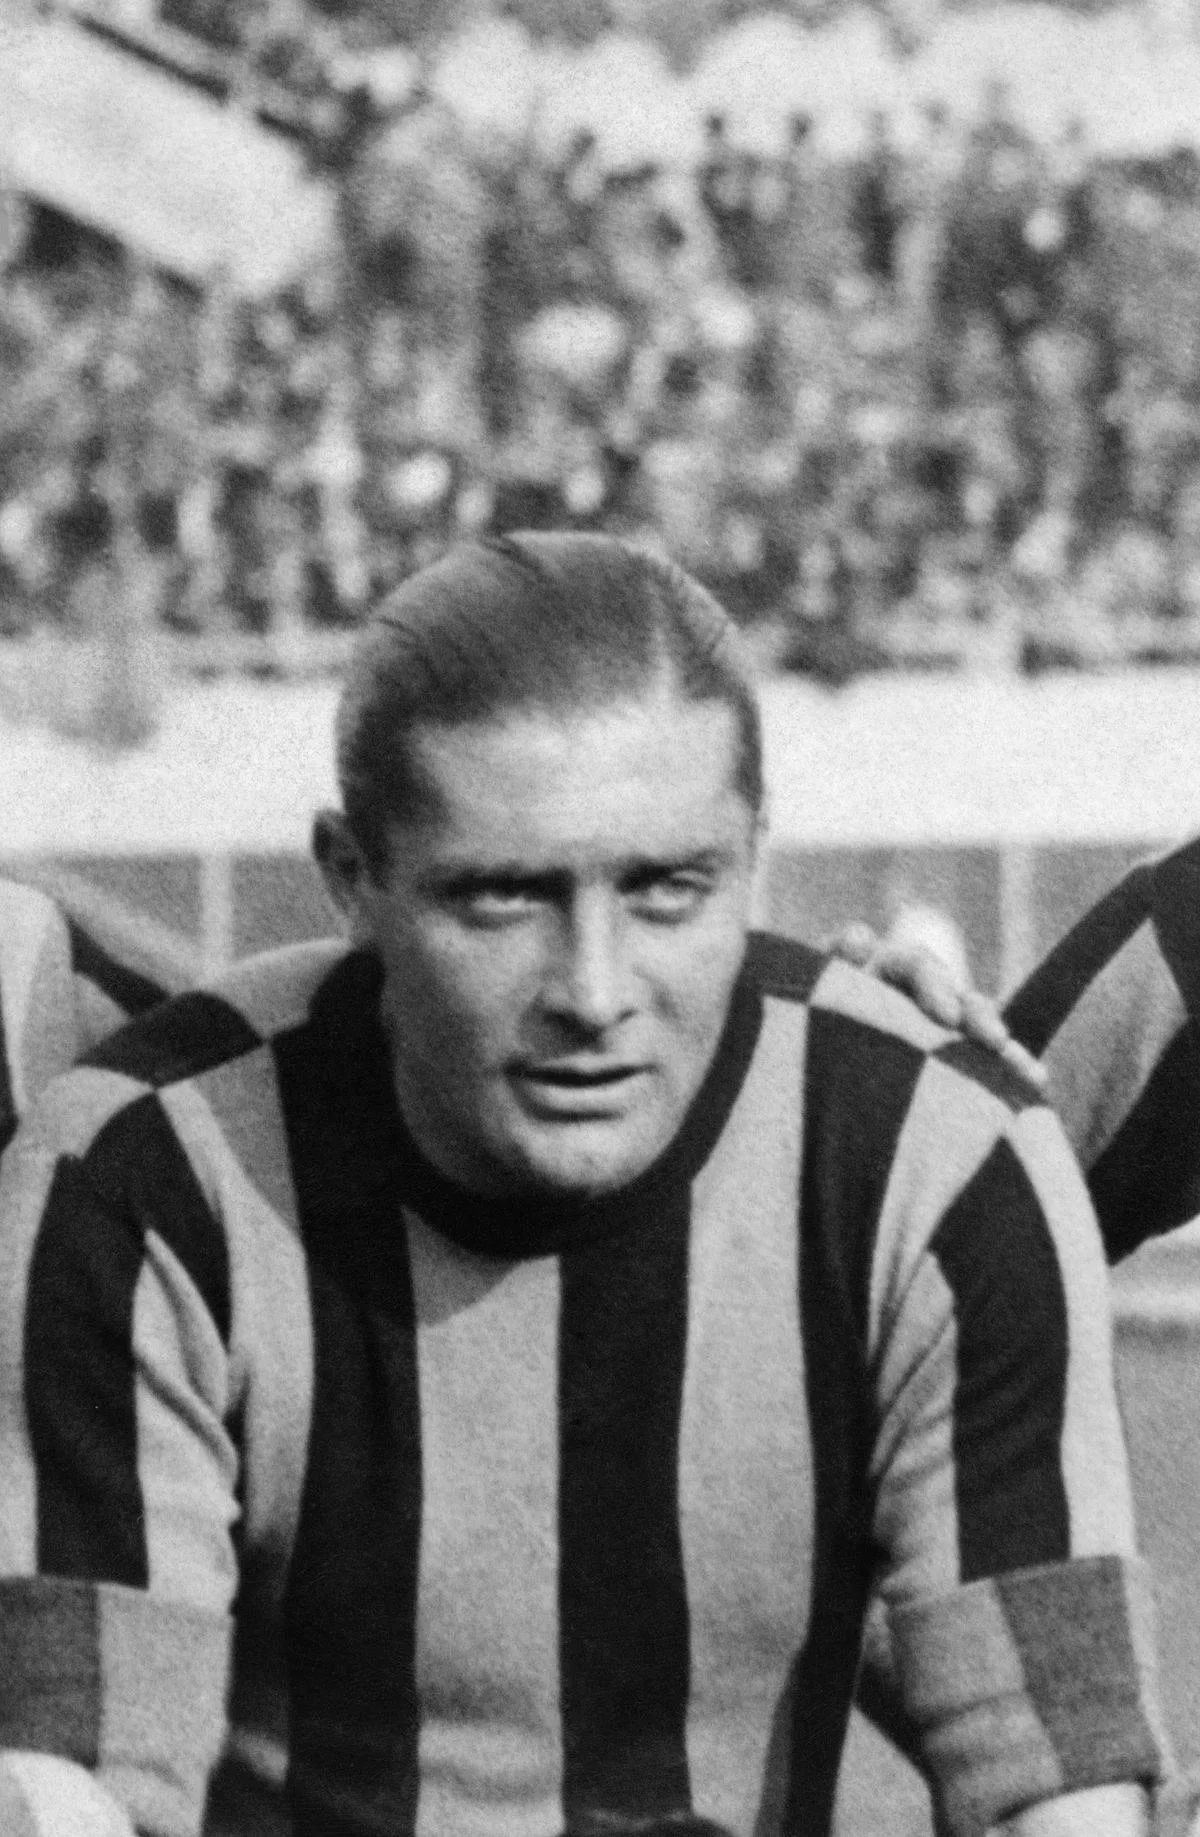 The footballer Giuseppe Meazza is photographed before a match in the 1930's wearing the Inter-Milan jersey